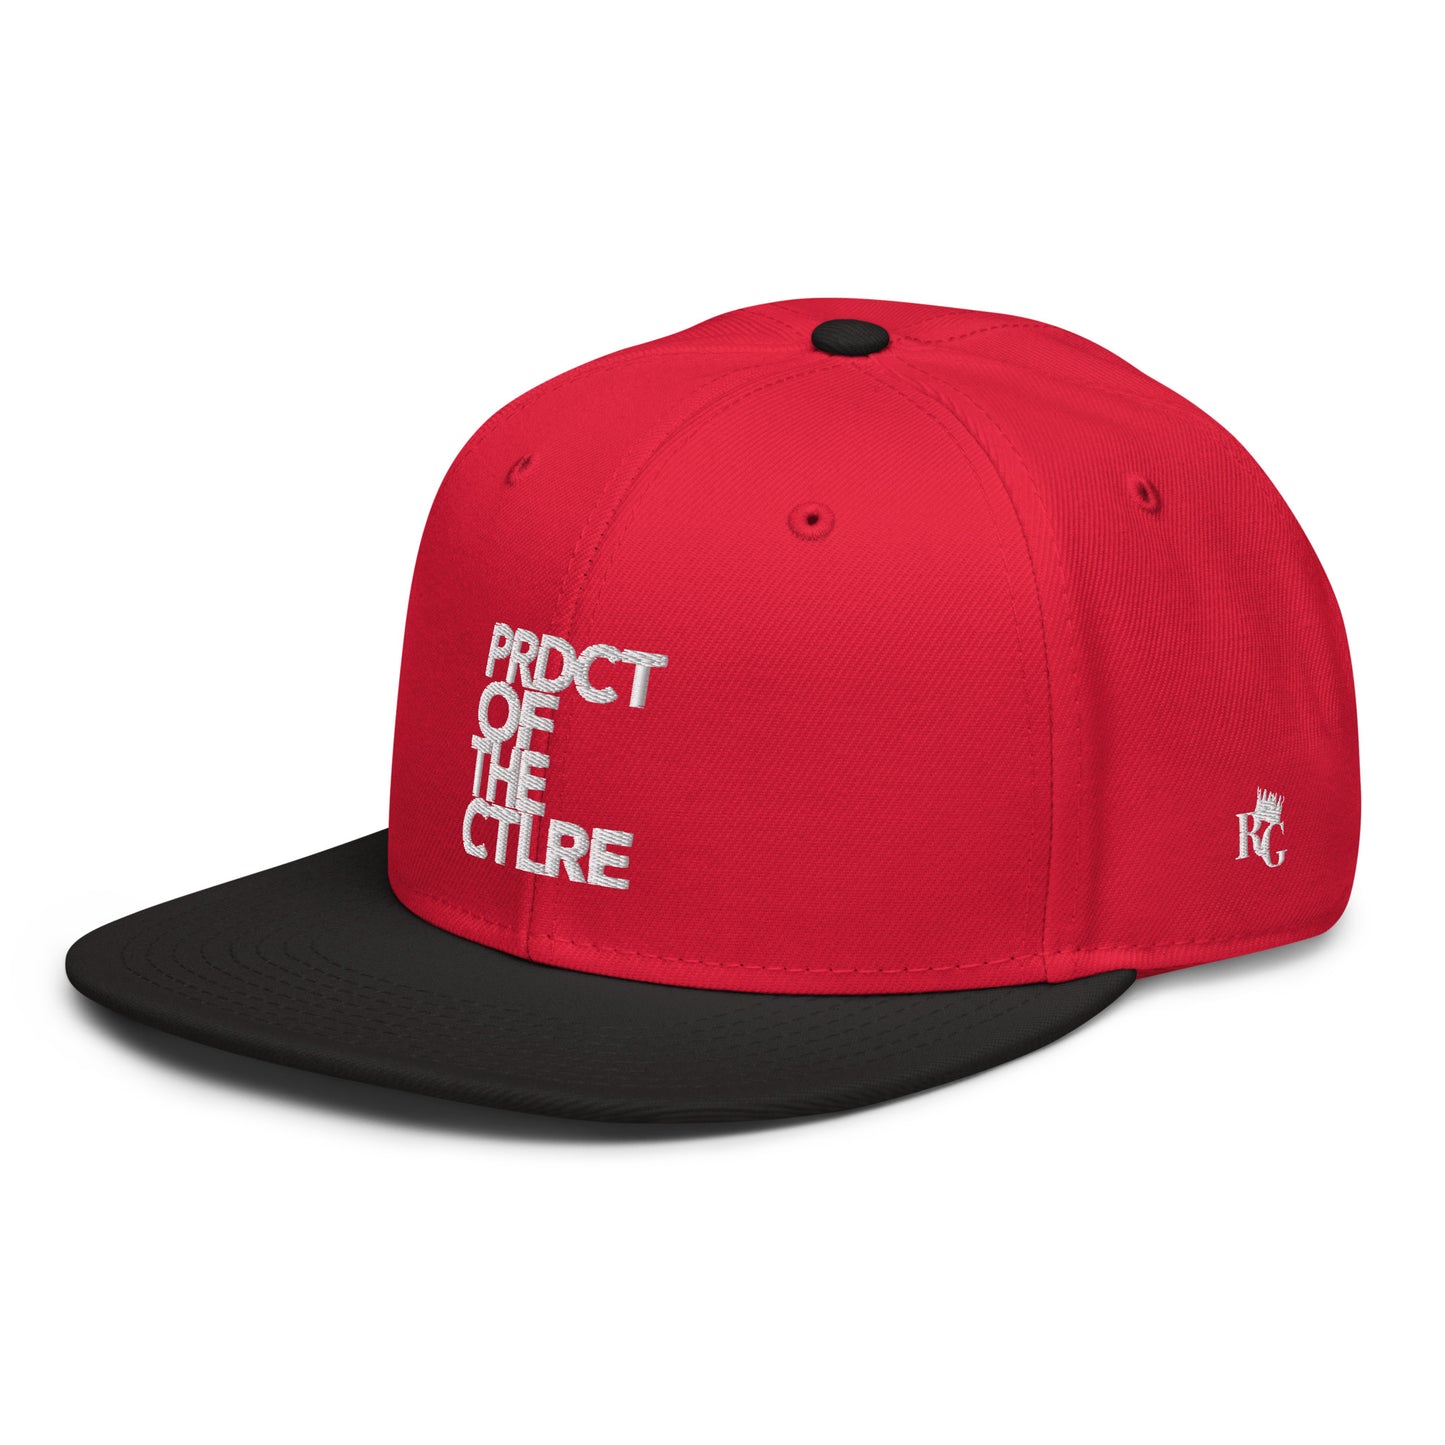 "Product of the Culture" Hat